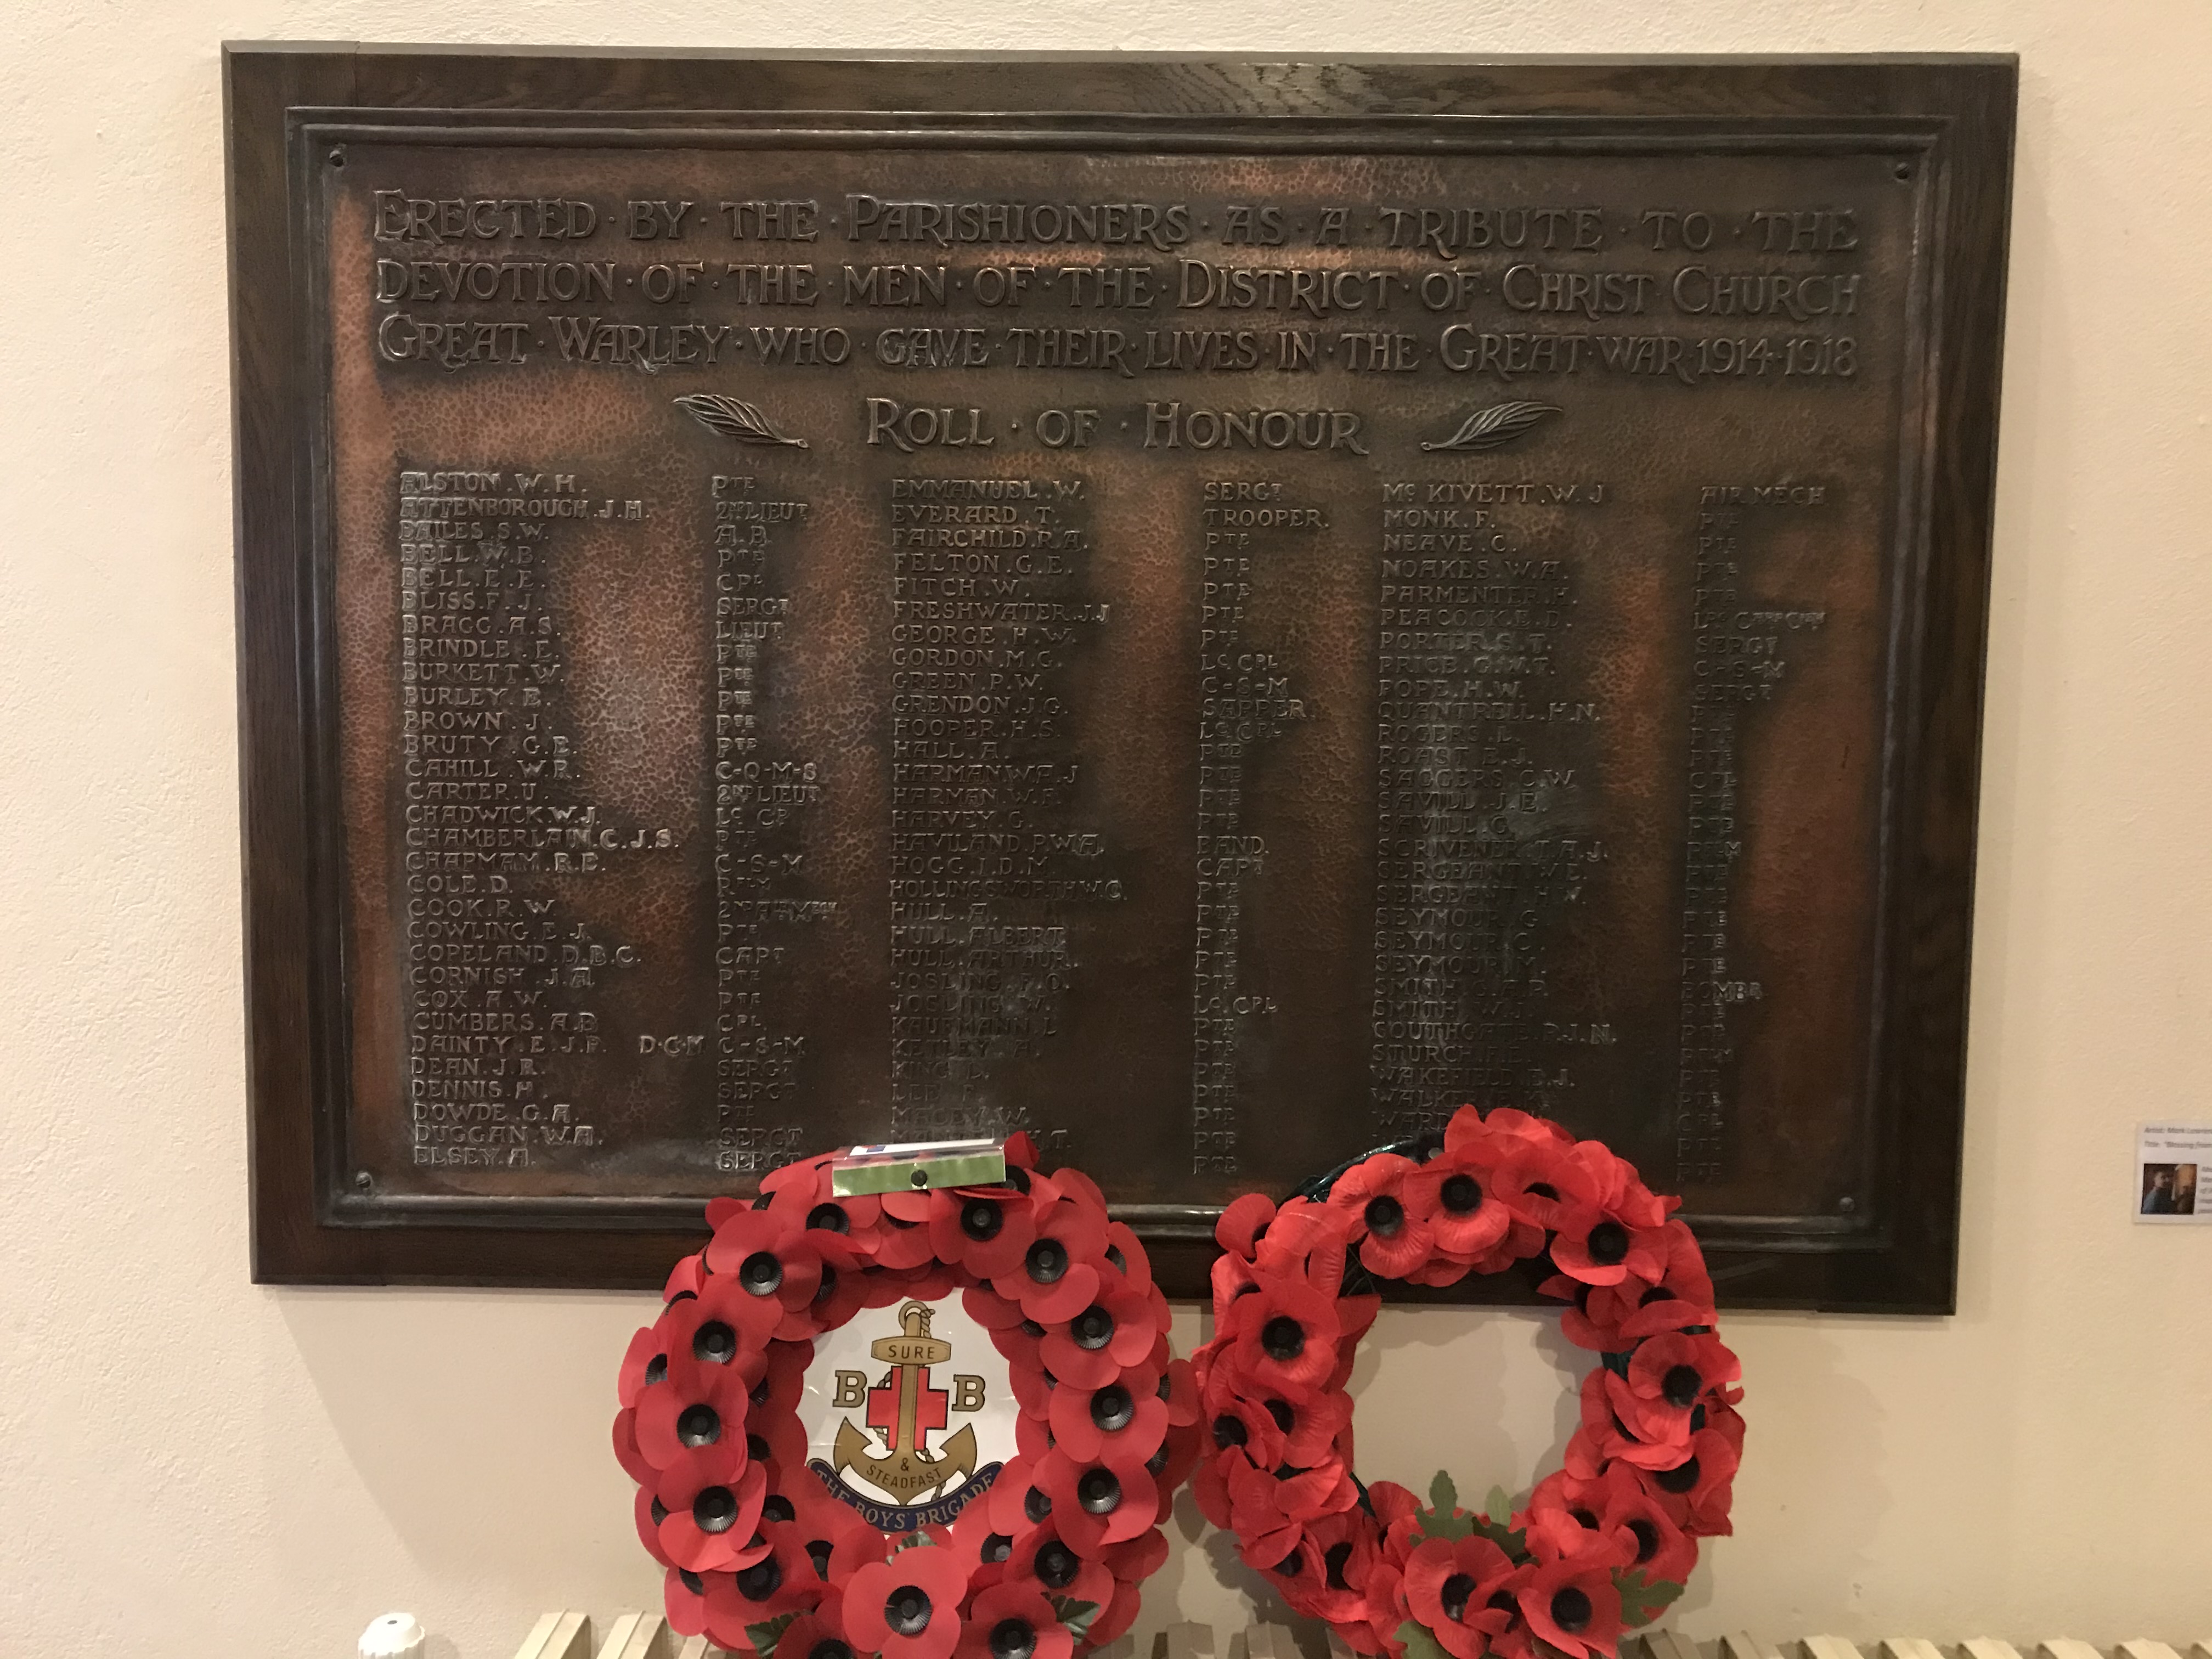 Remembrance Sunday with wreath